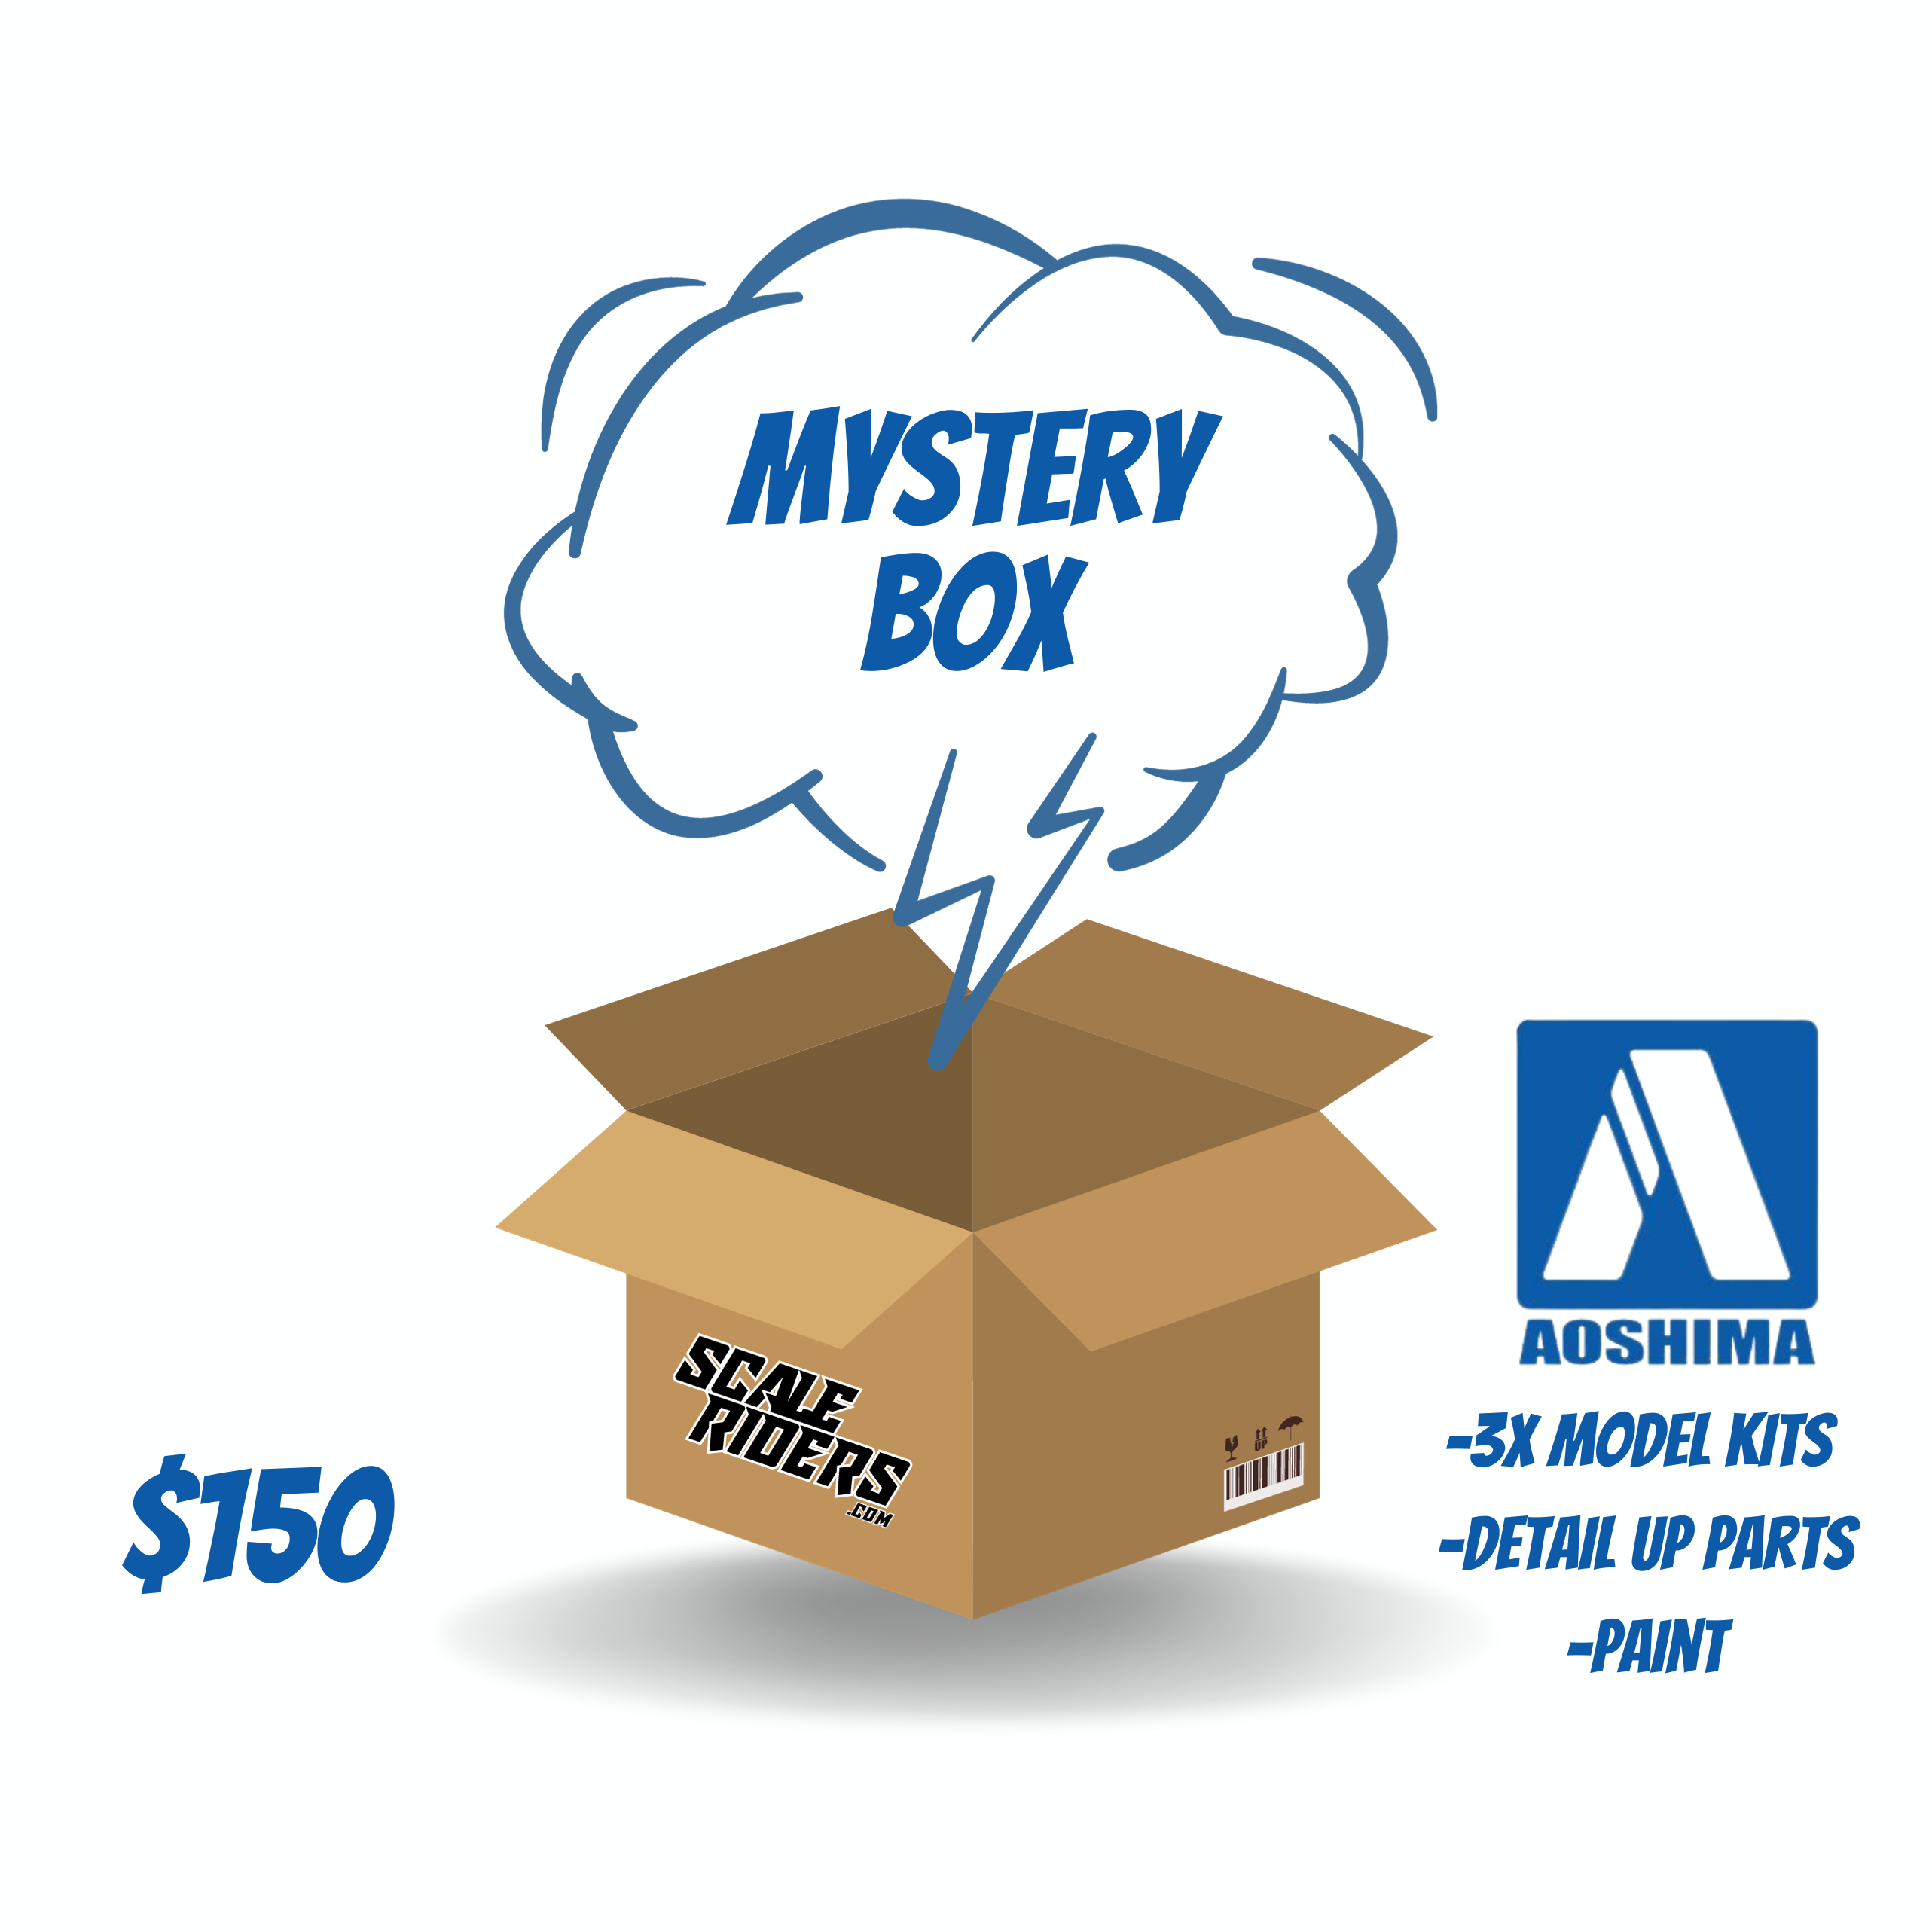 Scale Riders Hobby Tools Mystery Box $50